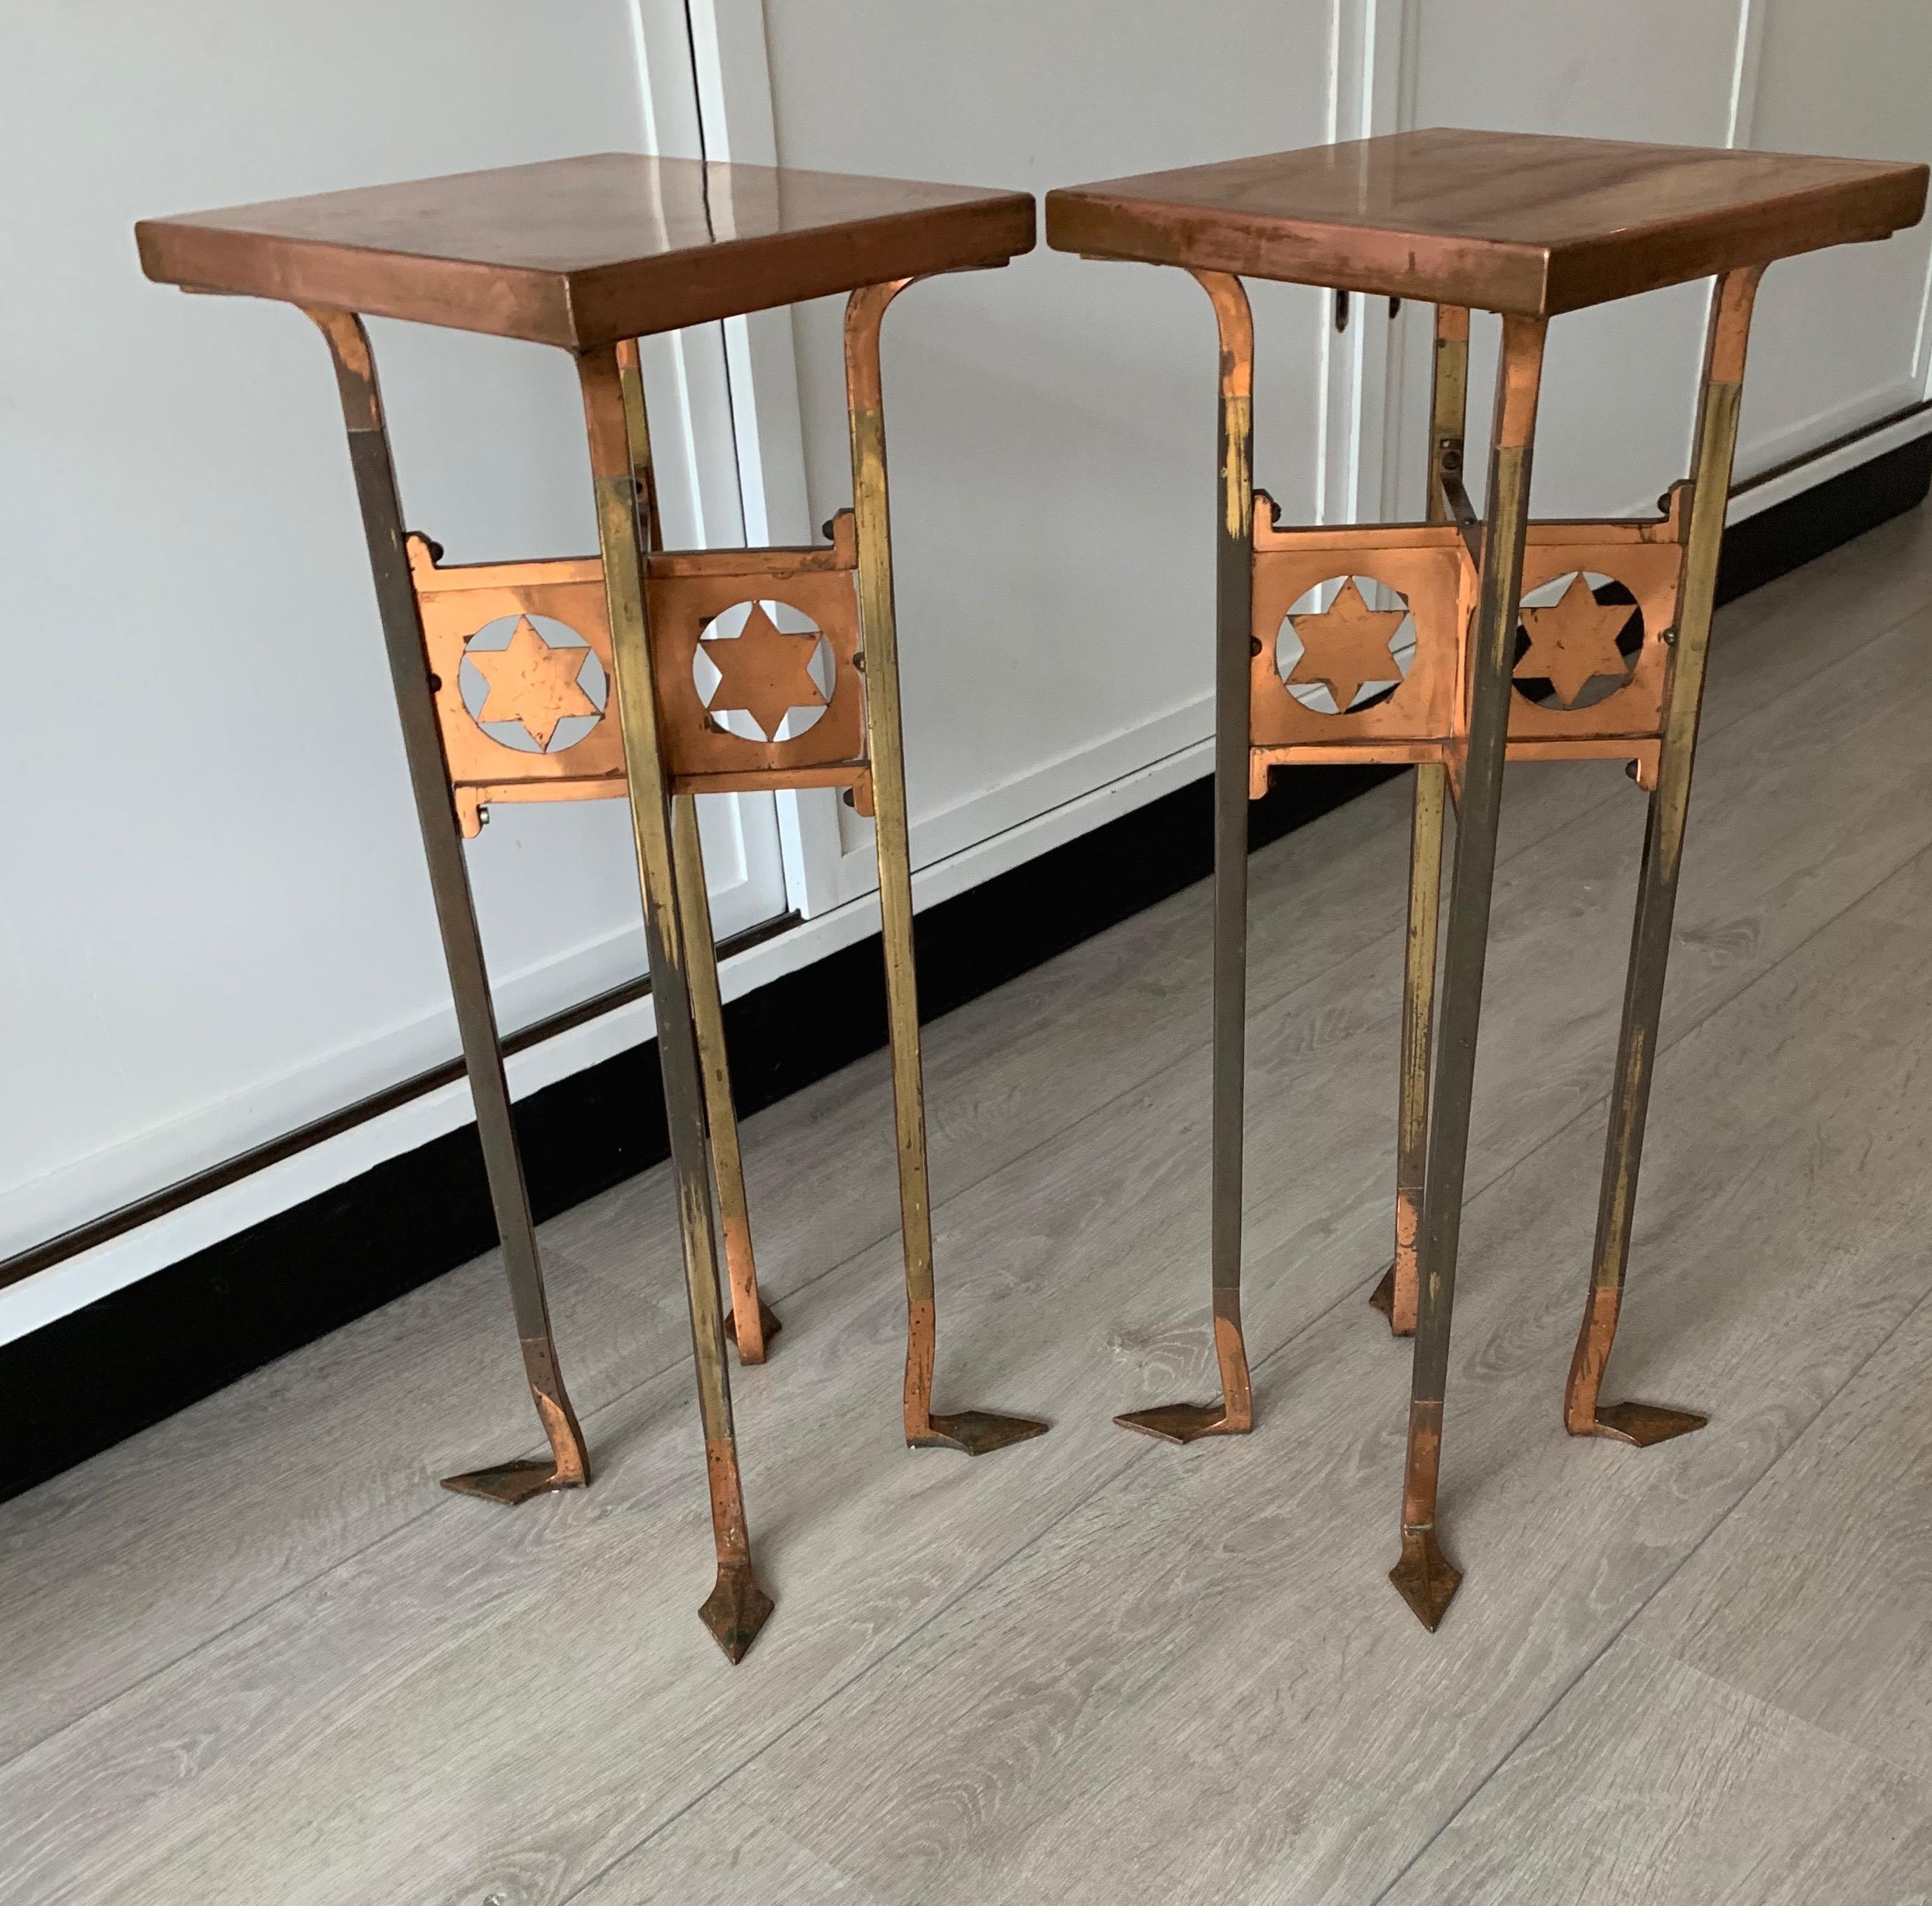 Unique and timeless pair of early 20th century stands.

When it comes to medium size Arts & Crafts pedestals, this rare pair could very well be the most handsome and stylish we ever had the pleasure of offering. Handcrafted with a combination of